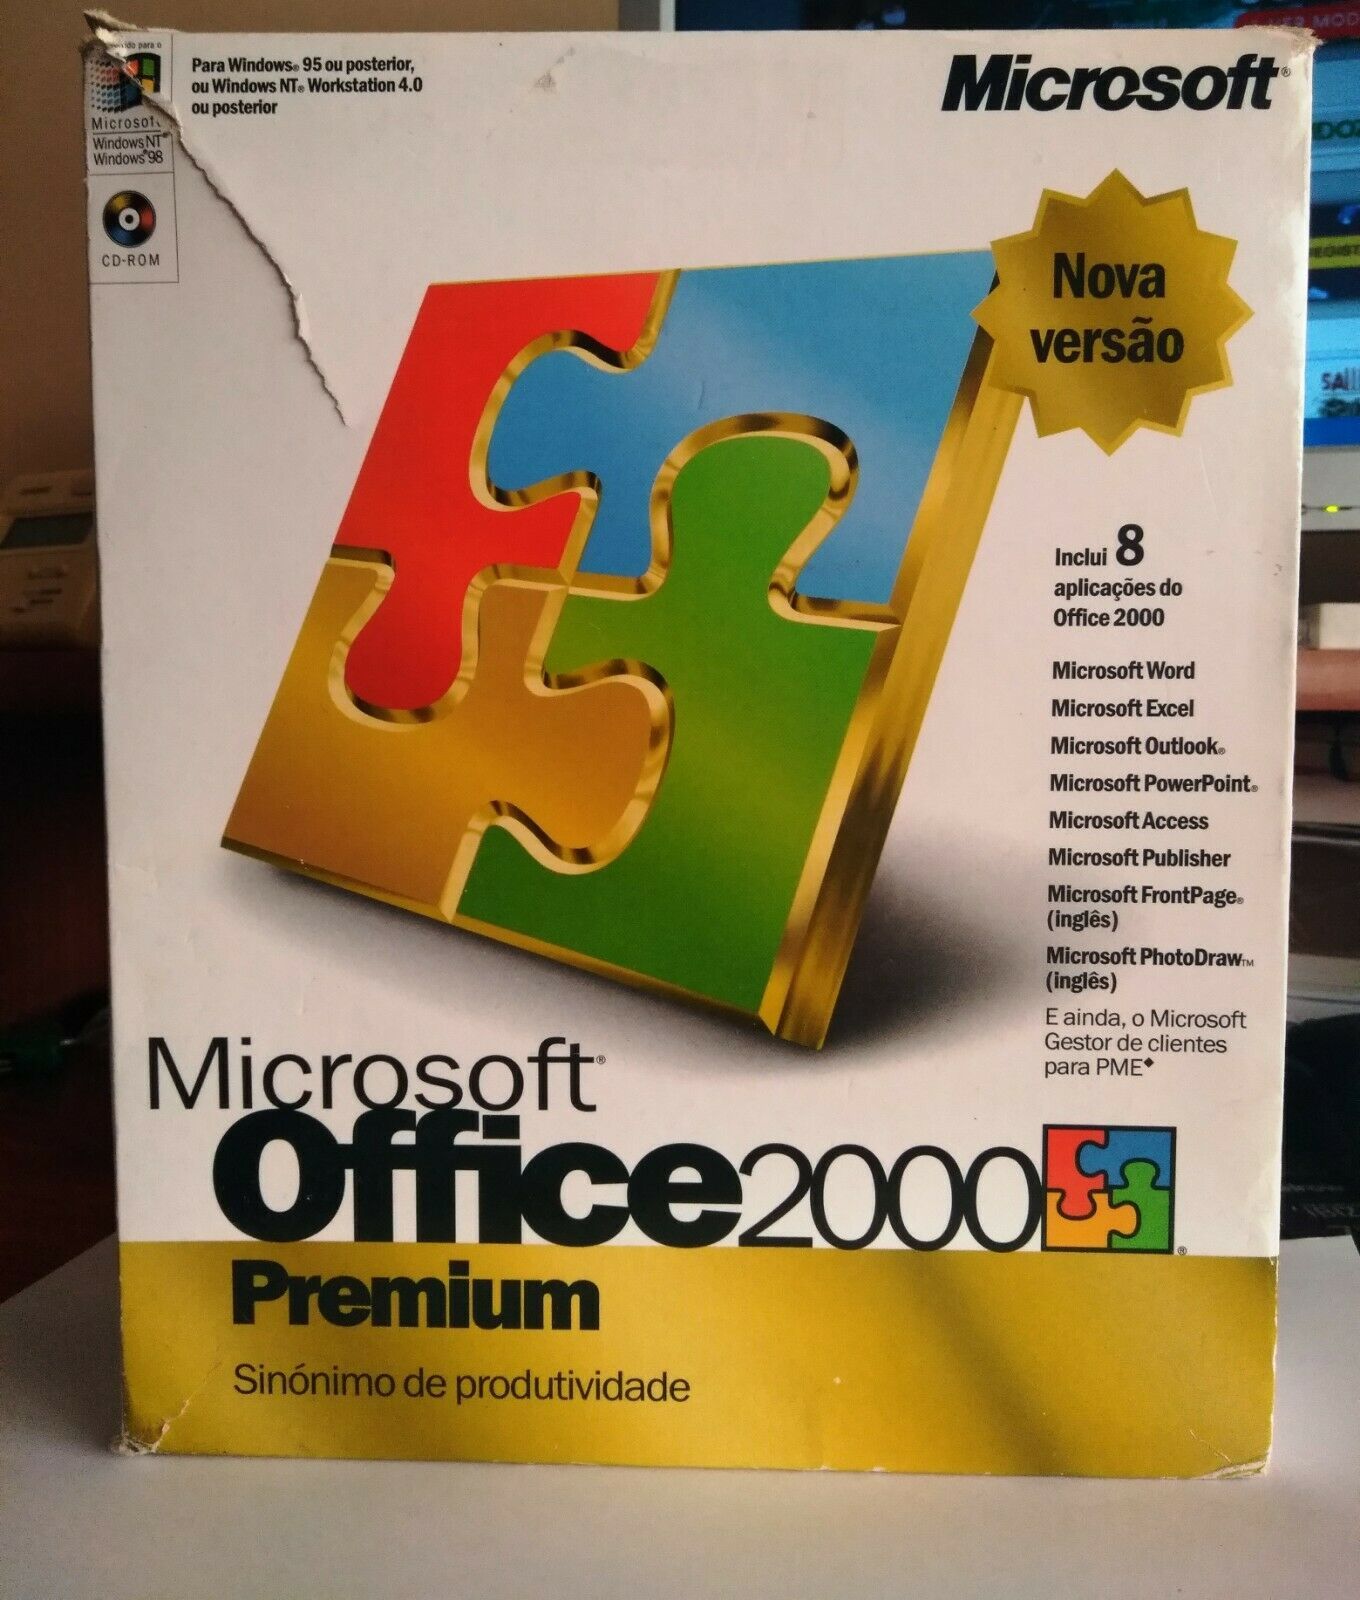 does powerpoint come with office xp pro with frontpage